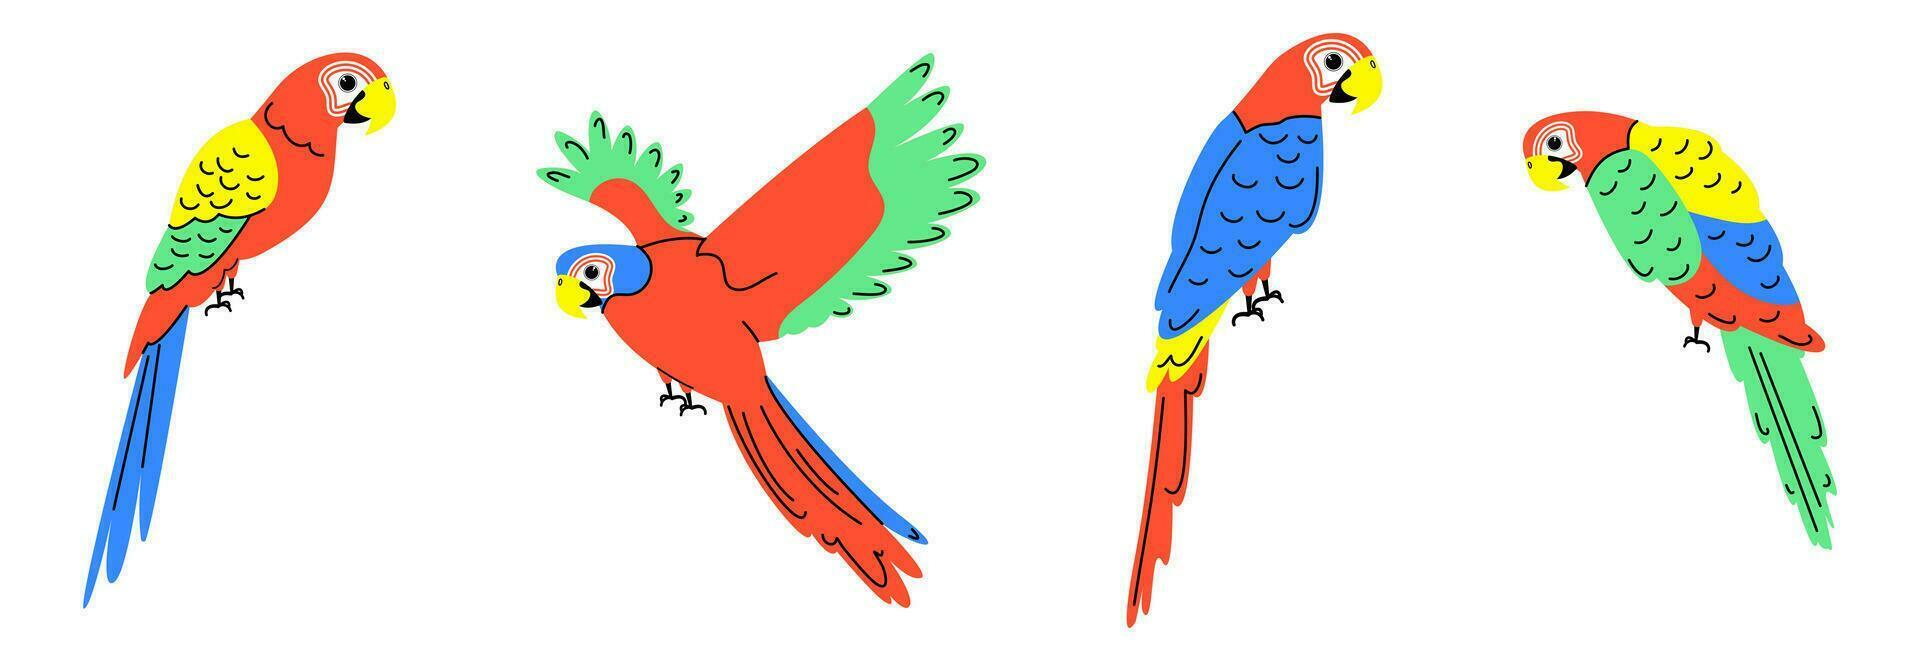 Colorful set with parrots in flat style. Vector illustration of cute parrot characters.